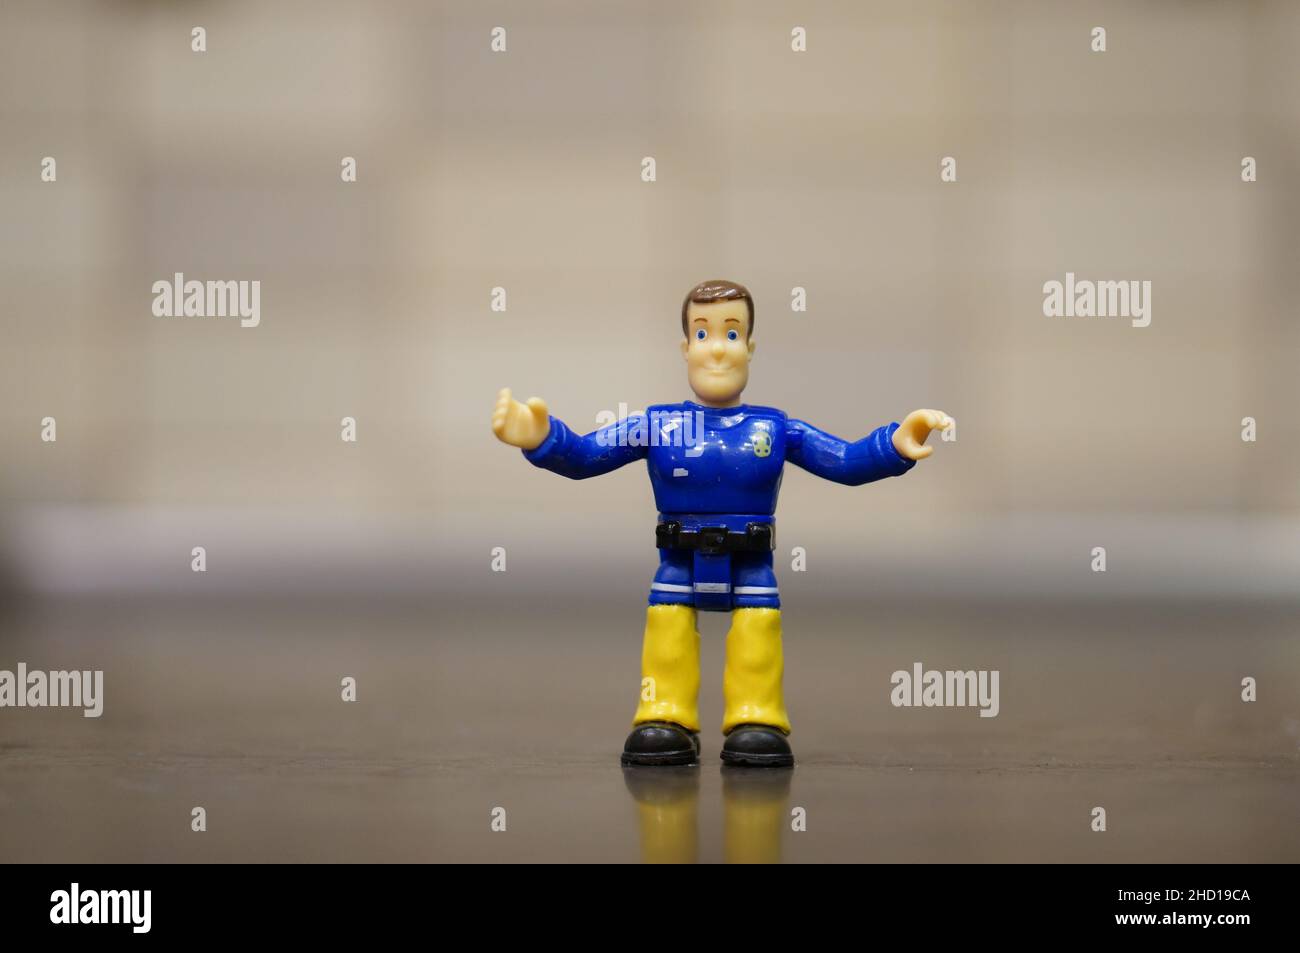 Fireman Sam toy figurine character with wide arms. Stock Photo